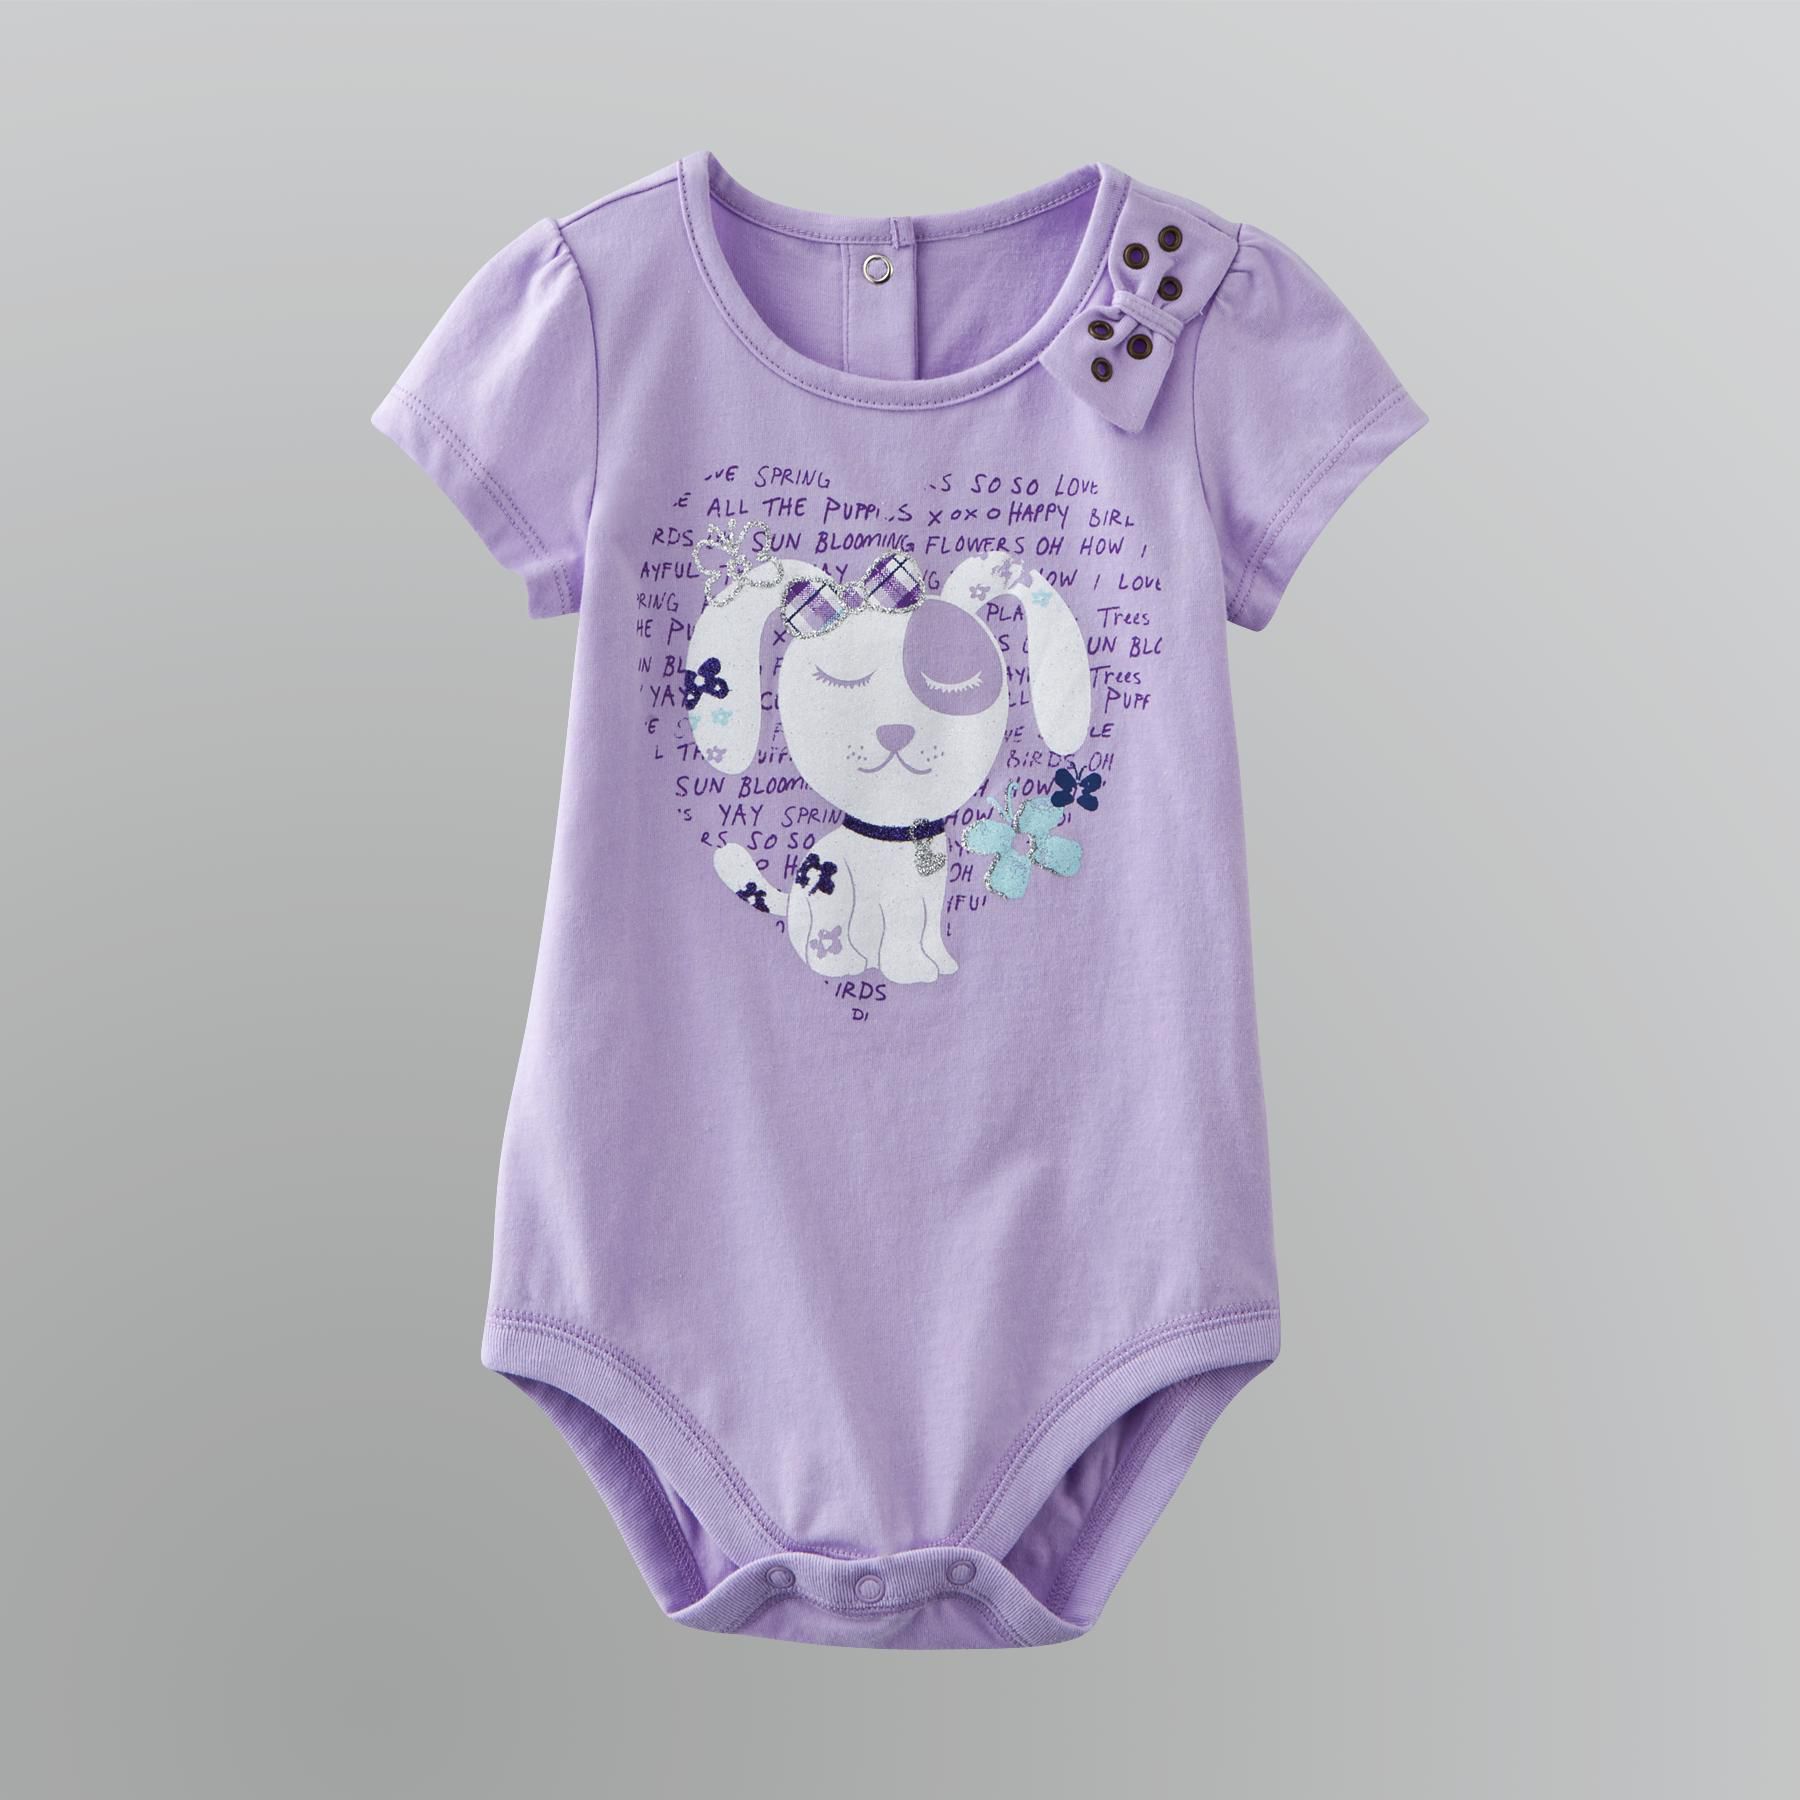 Toughskins Infant Girl's Edgy Puppy Bodysuit Top